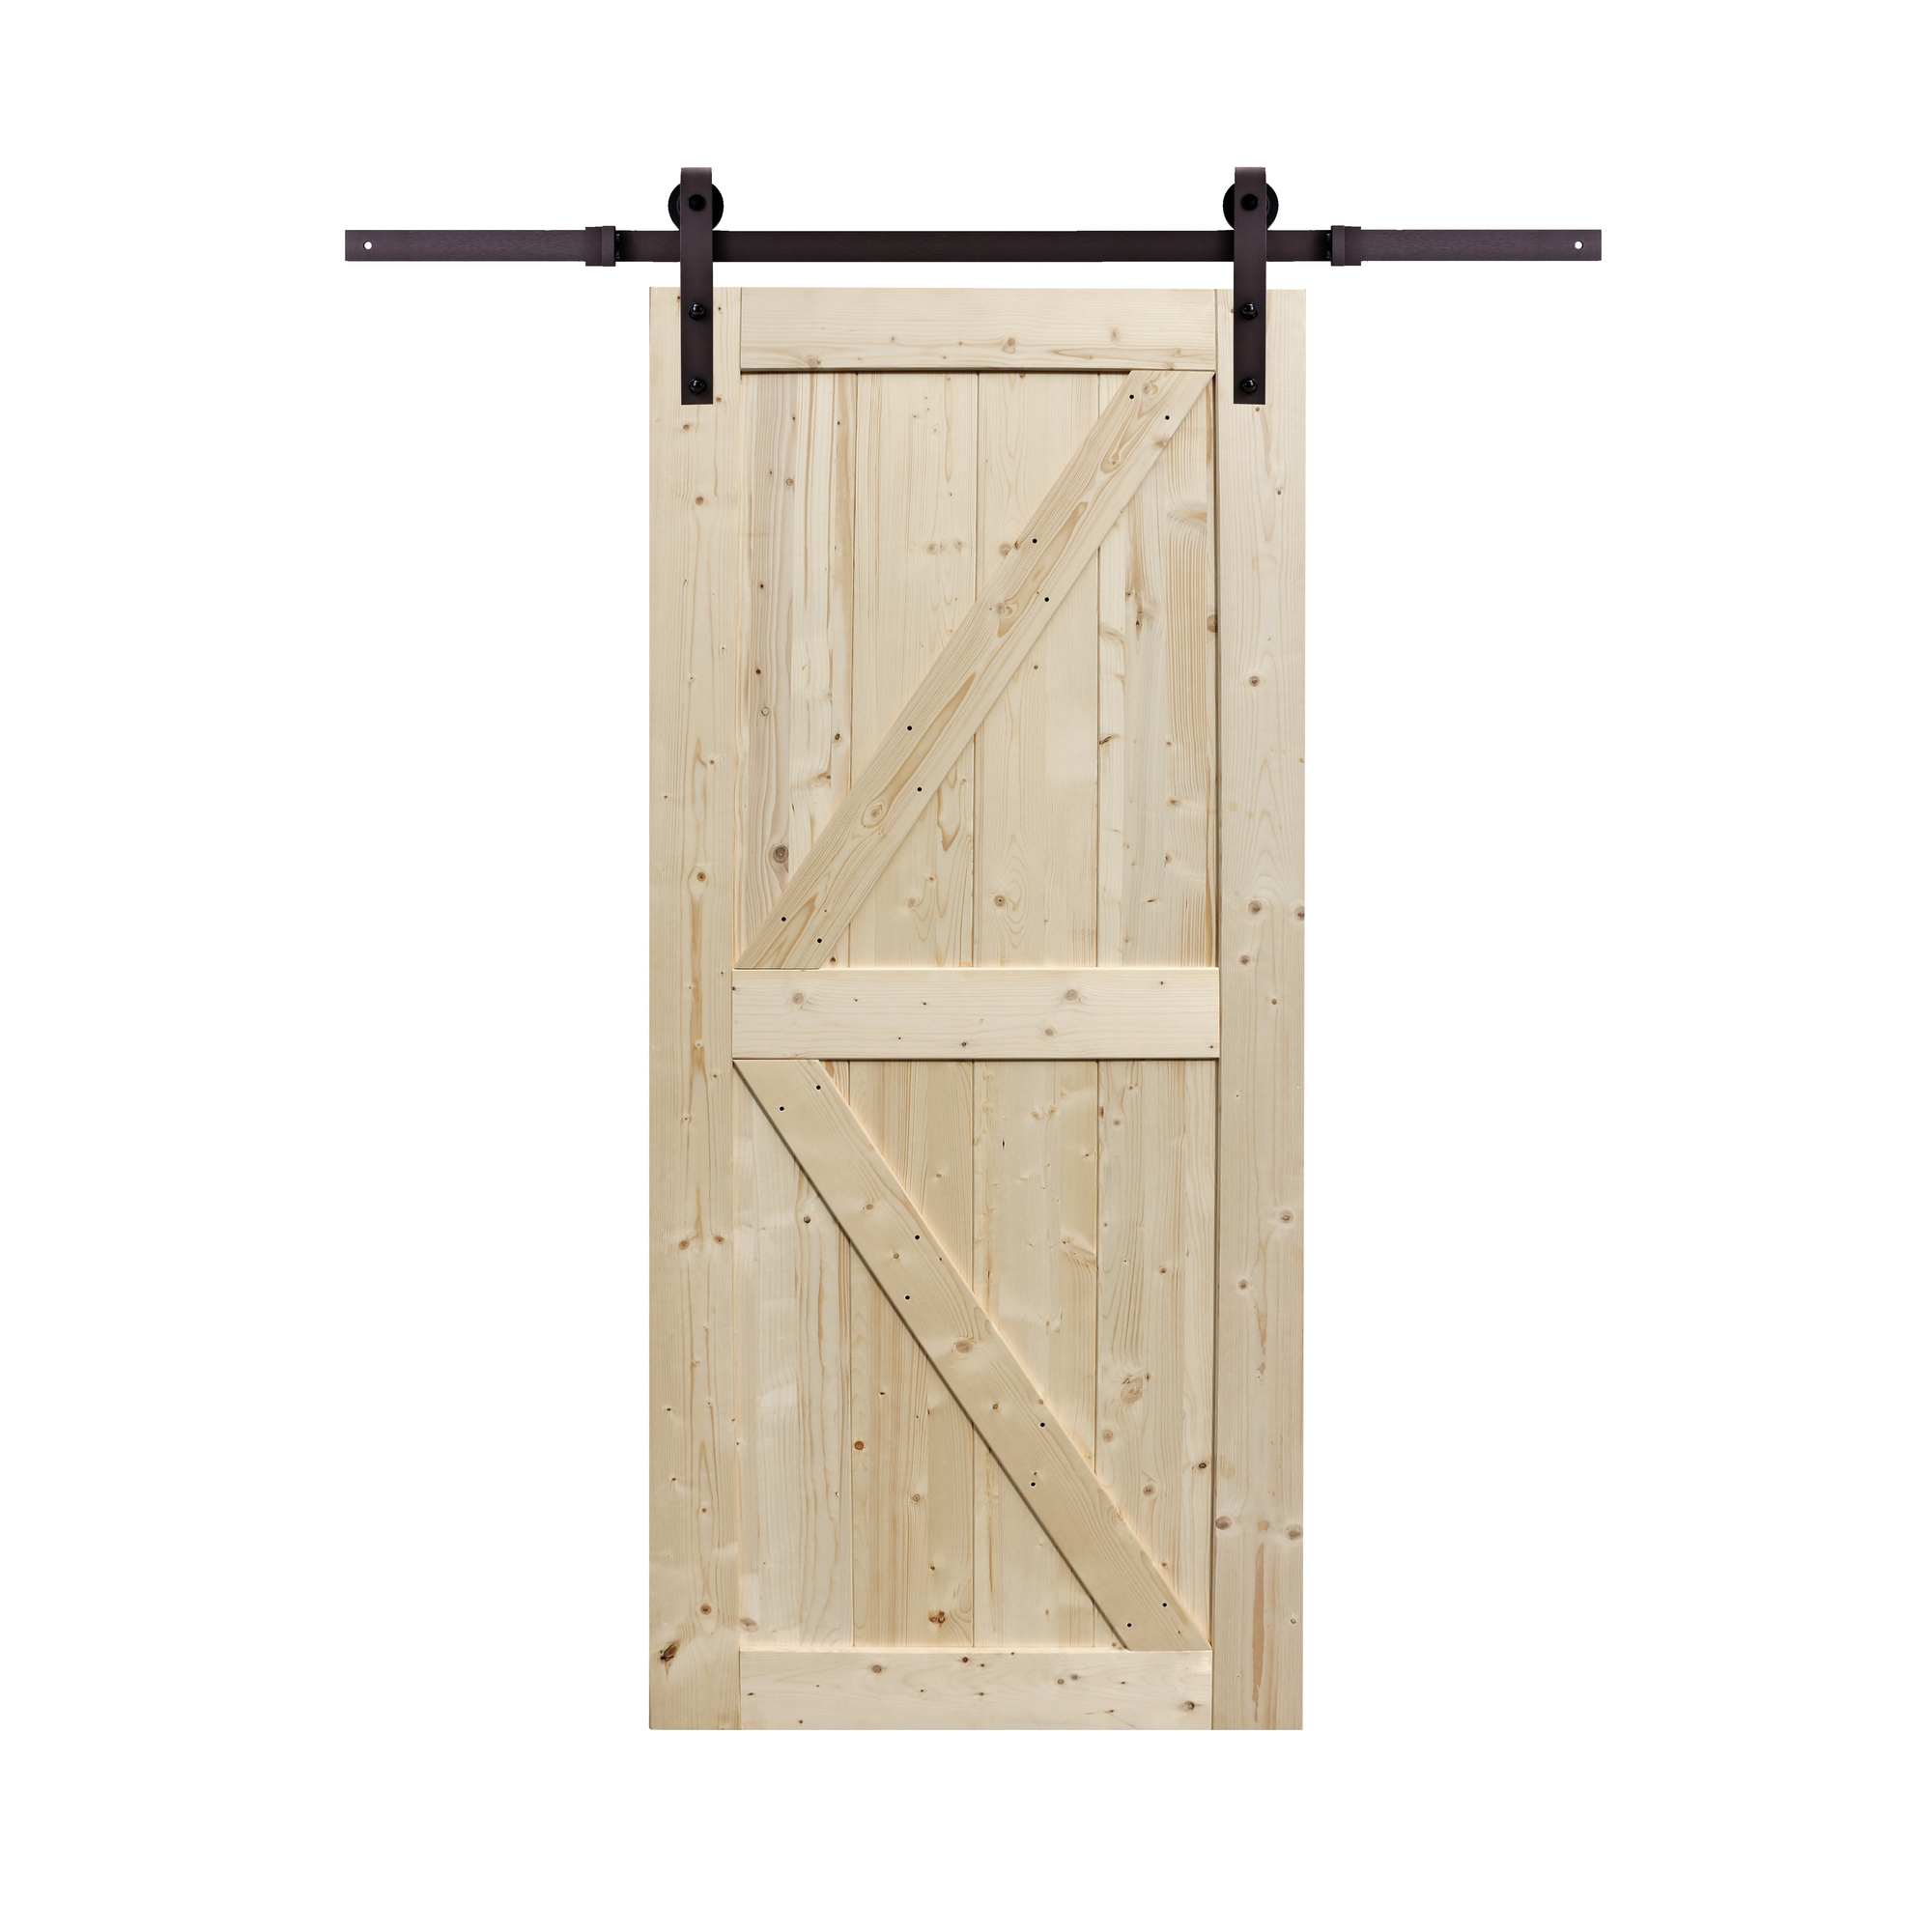 Merry Products, Artisan Sliding Door Kit Unfinished, Length 84.06 in, Width 35.98 in, Model COV0301901910